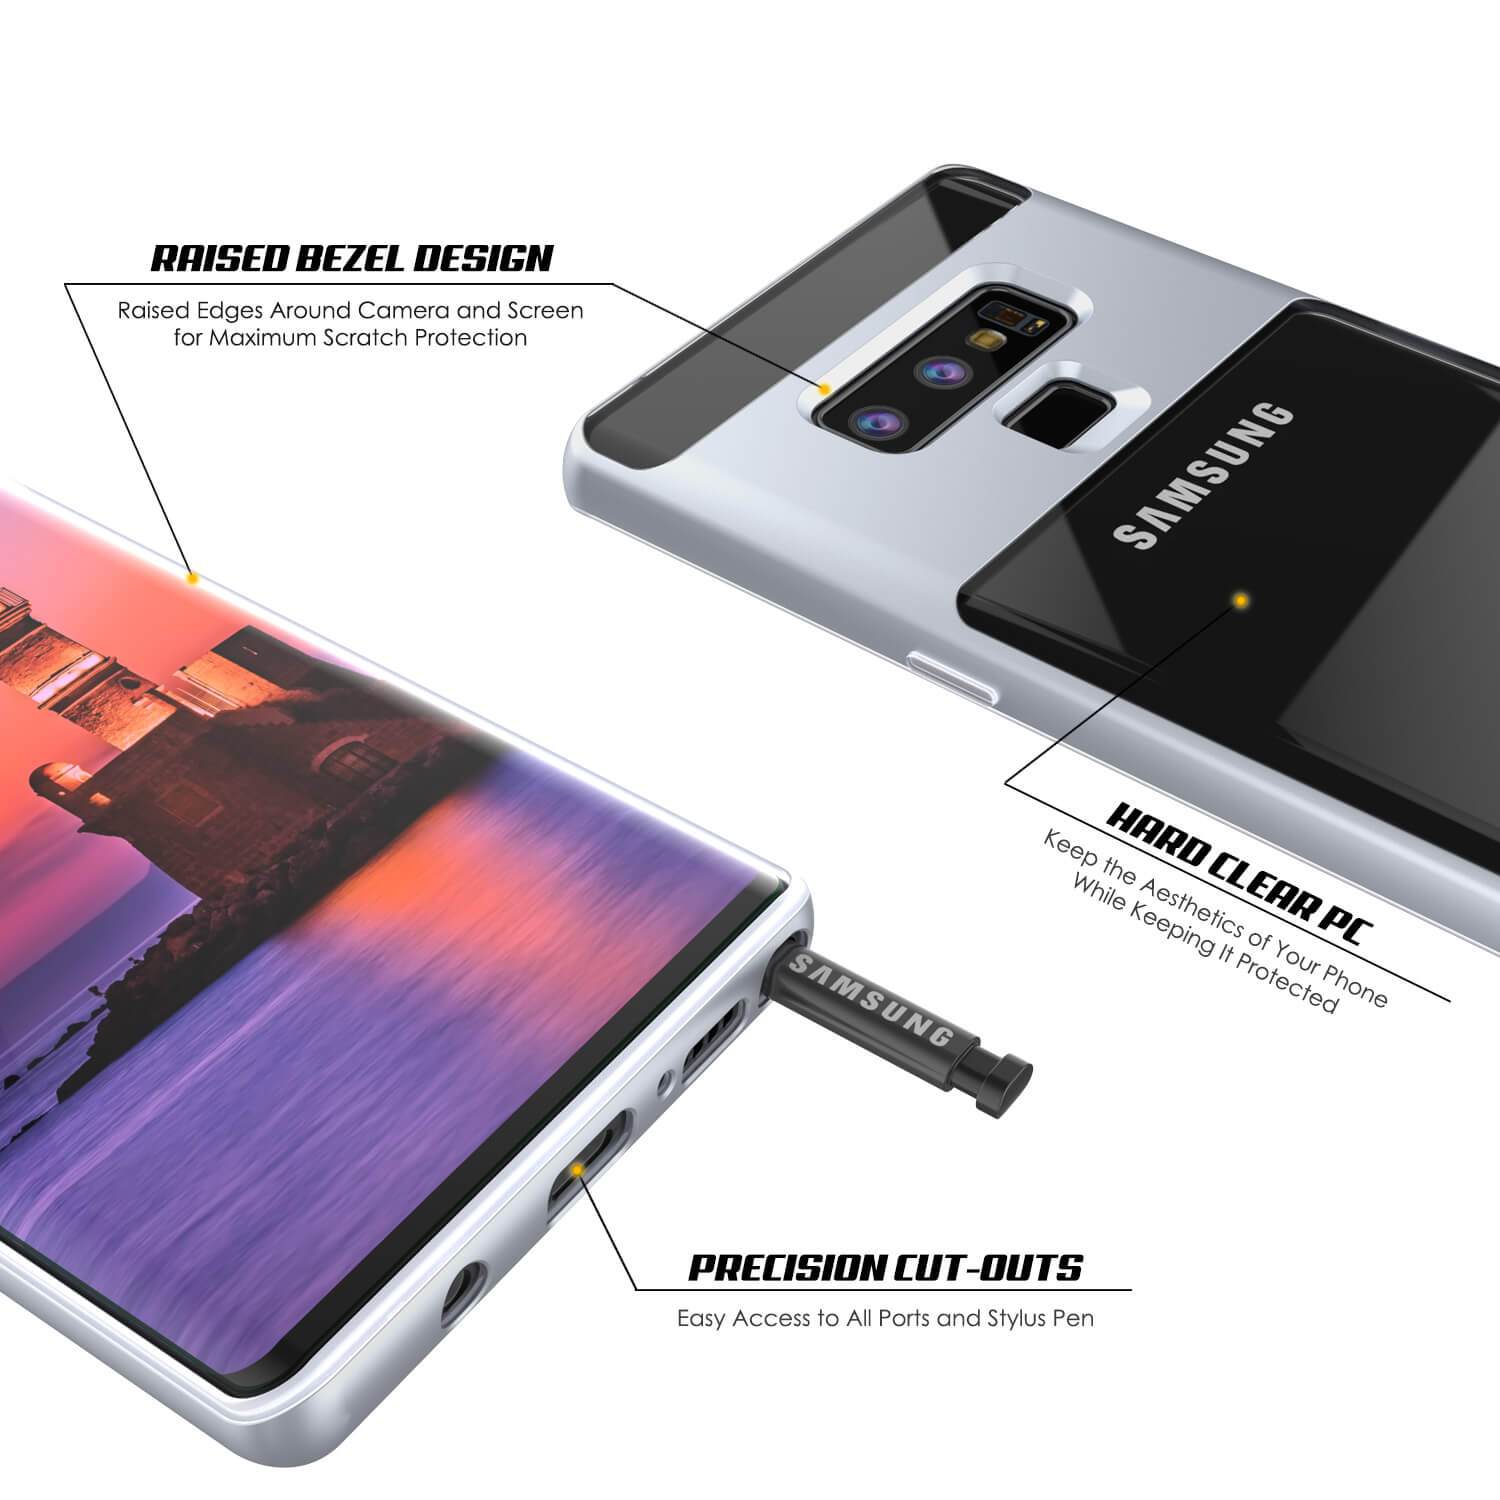 Galaxy Note 9 Lucid 3.0 PunkCase Armor Cover w/Integrated Kickstand and Screen Protector [Silver]